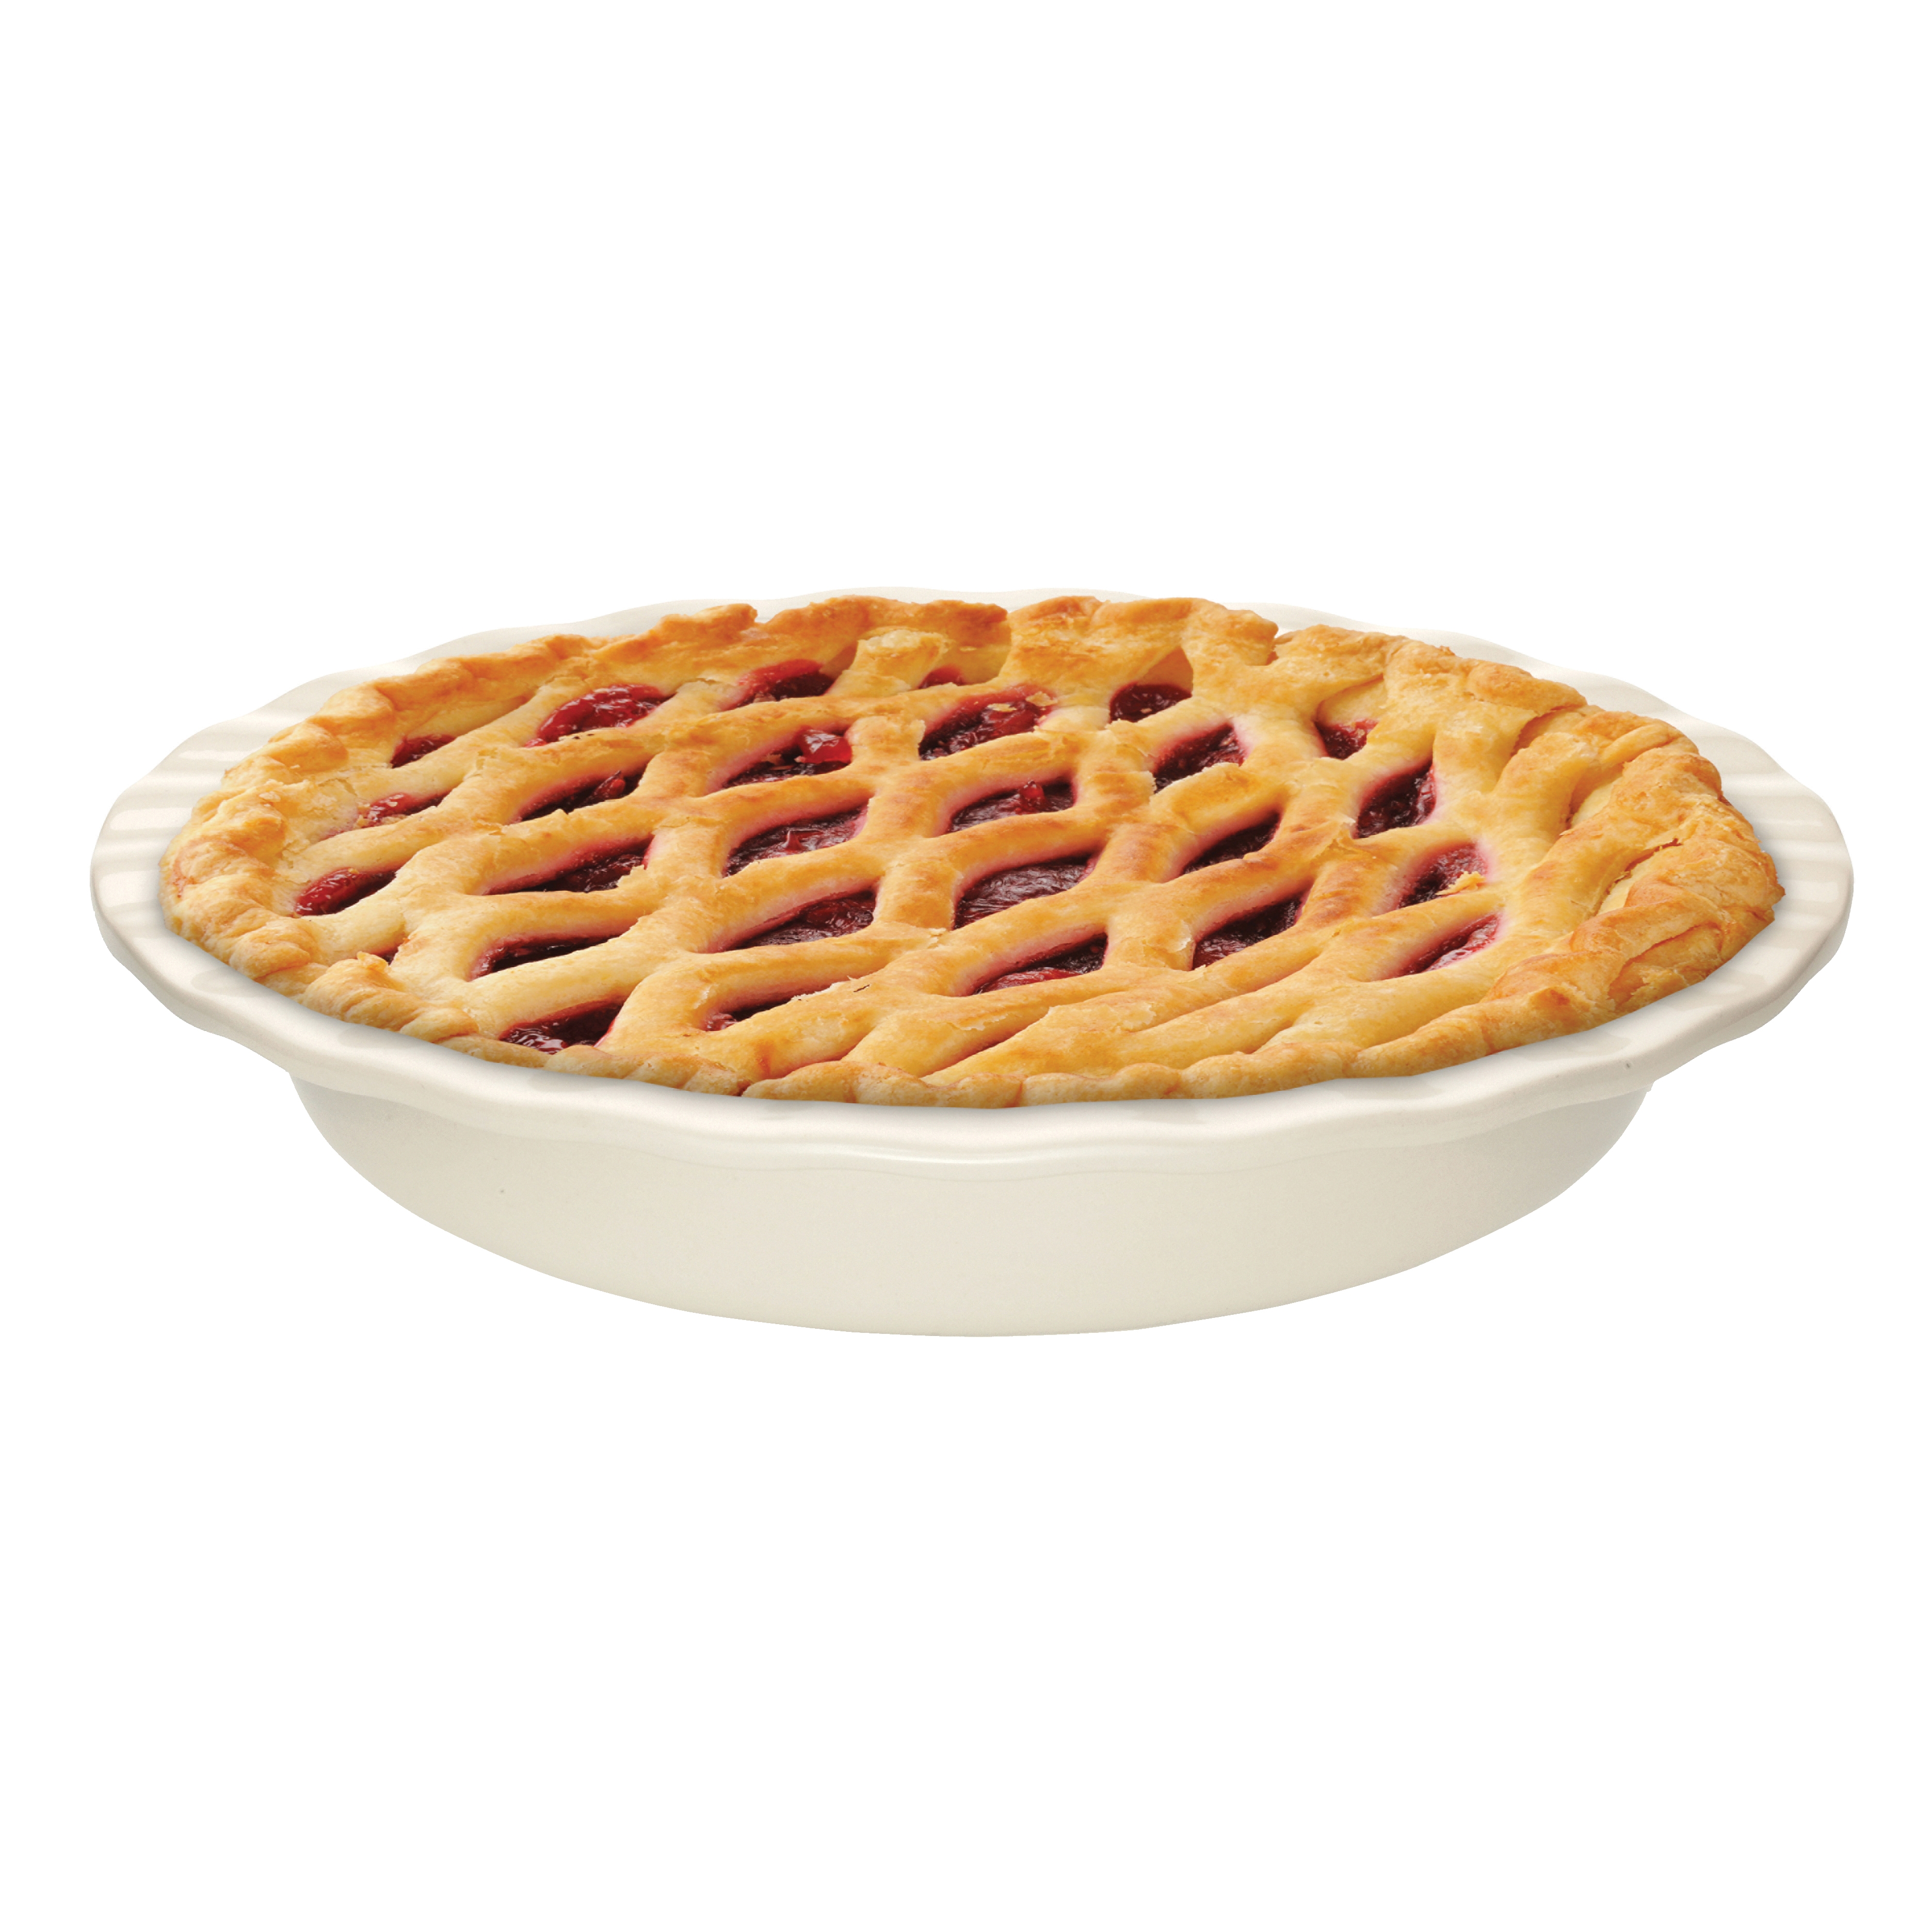 Mrs Anderson's Baking 98063 Pie Plate, 9.5 qt Capacity, 9-1/2 in Dia, Ceramic, White, Dishwasher Safe: Yes - 2